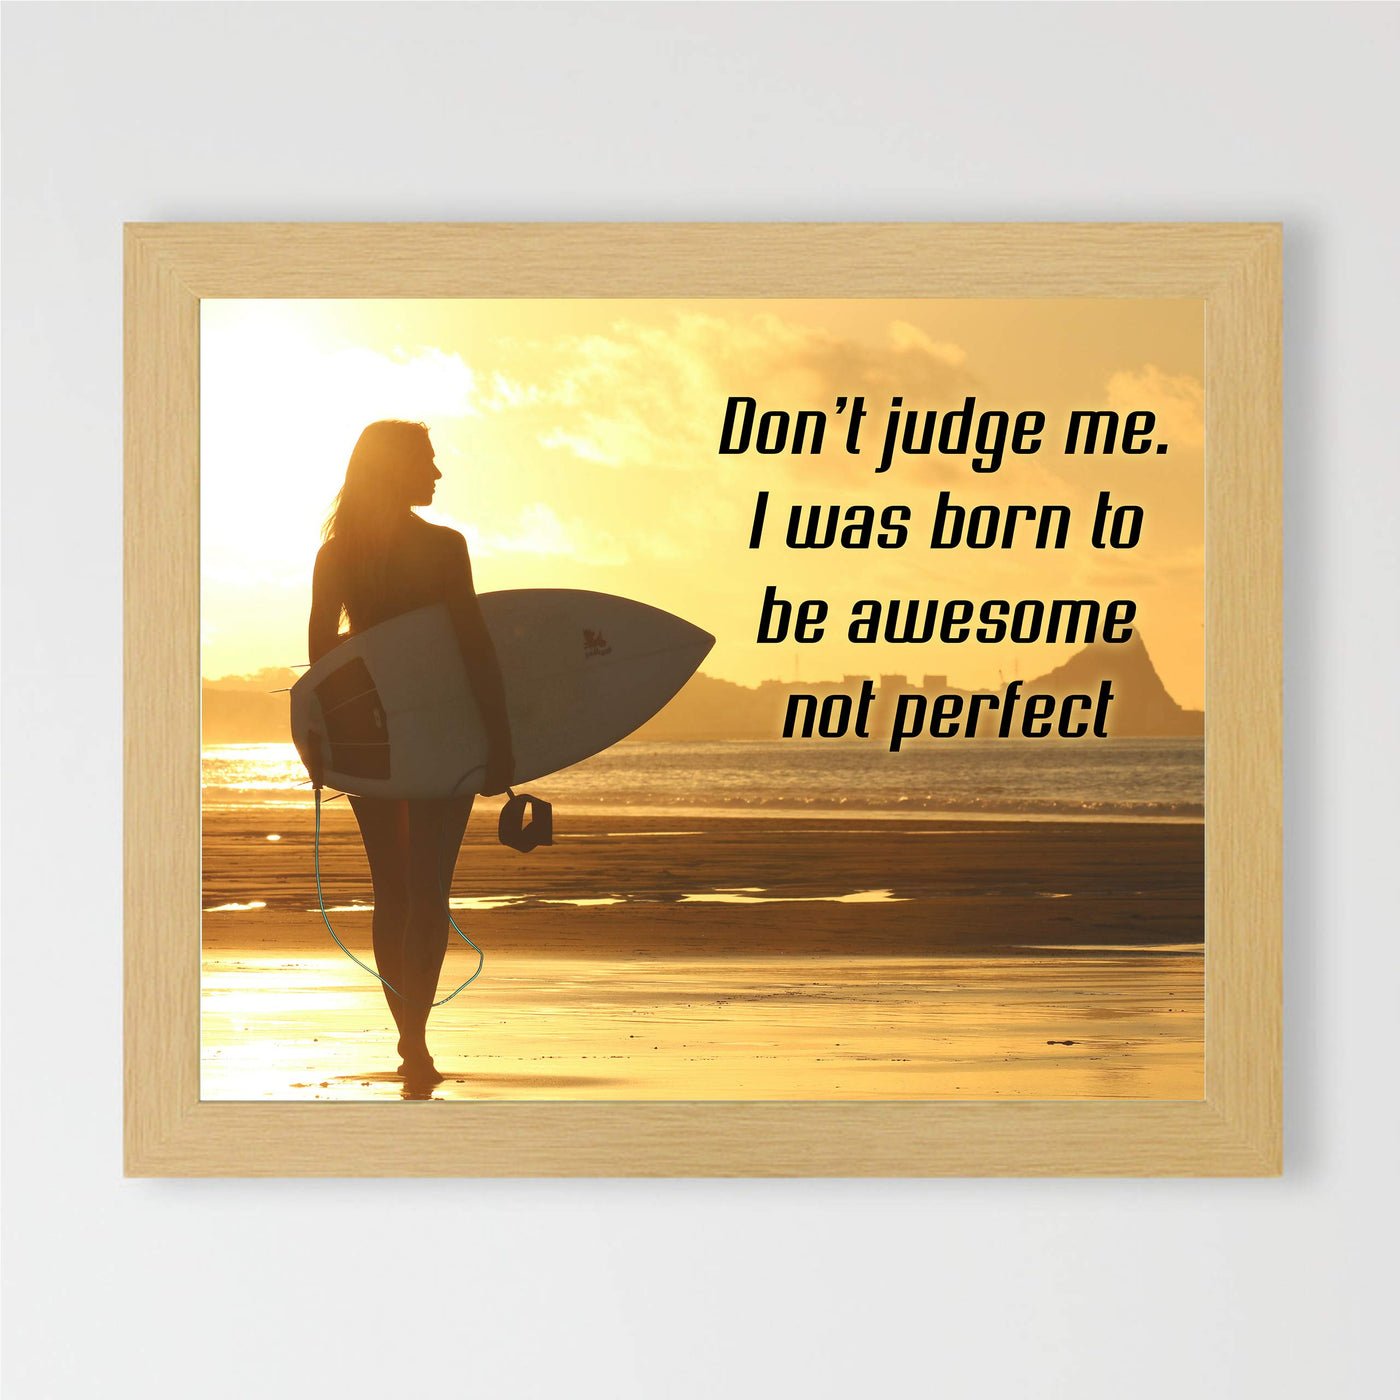 ?Don't Judge-I Was Born to be Awesome Not Perfect? Inspirational Quotes Wall Art -10 x 8" Beach Sunset Poster Print w/Surfer Girl Image-Ready to Frame. Home-Office-School-Dorm Decor. Great Reminder!